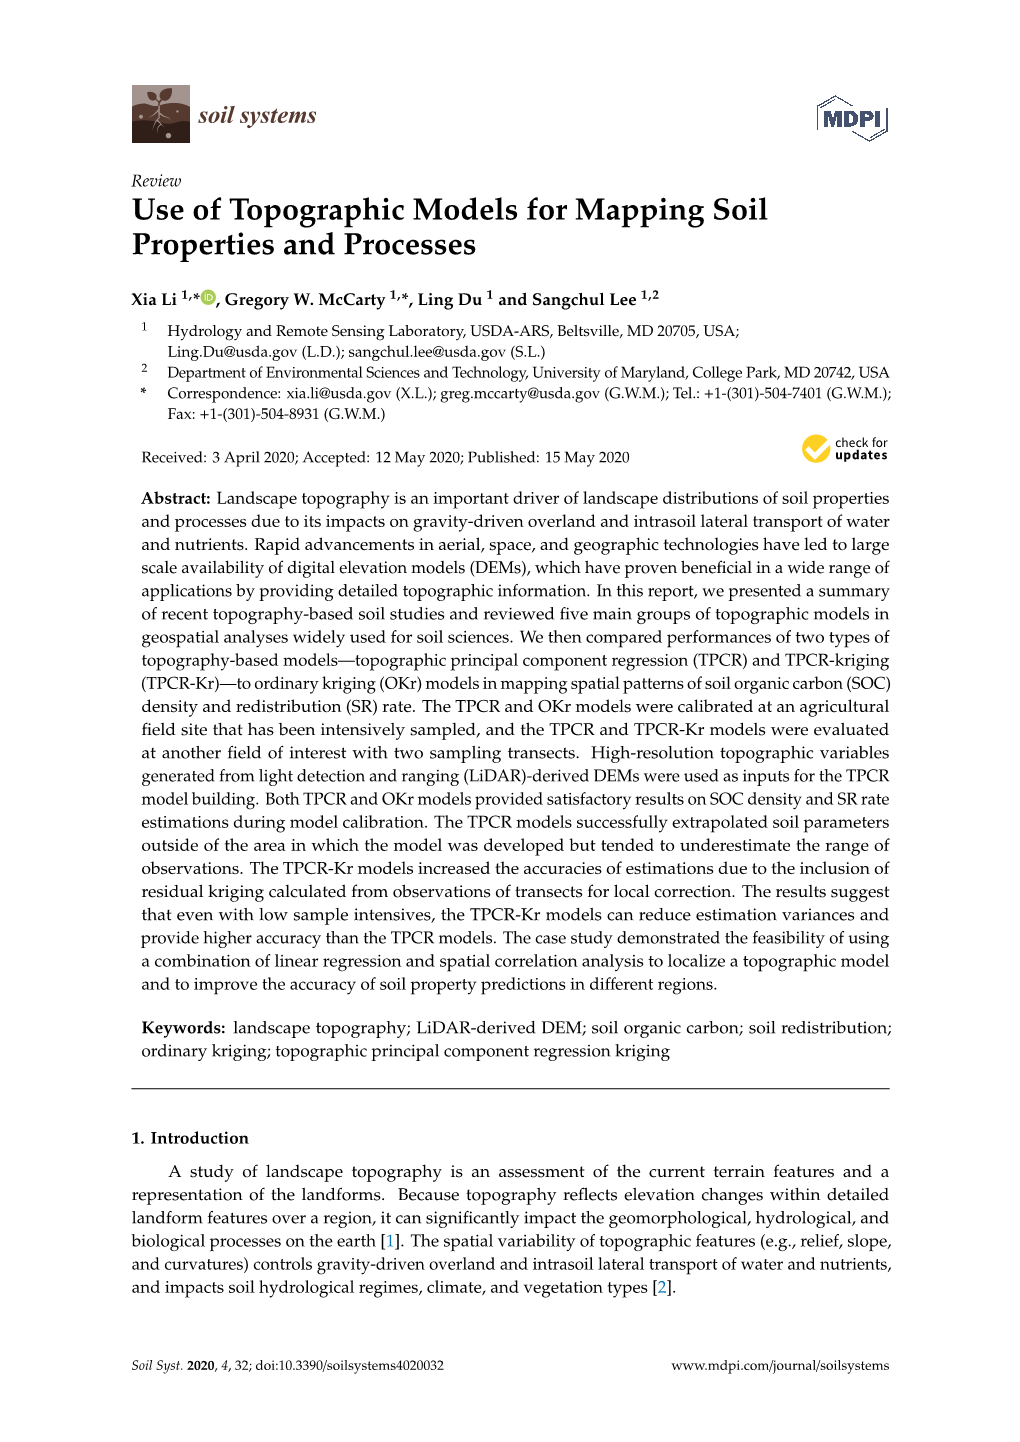 Use of Topographic Models for Mapping Soil Properties and Processes